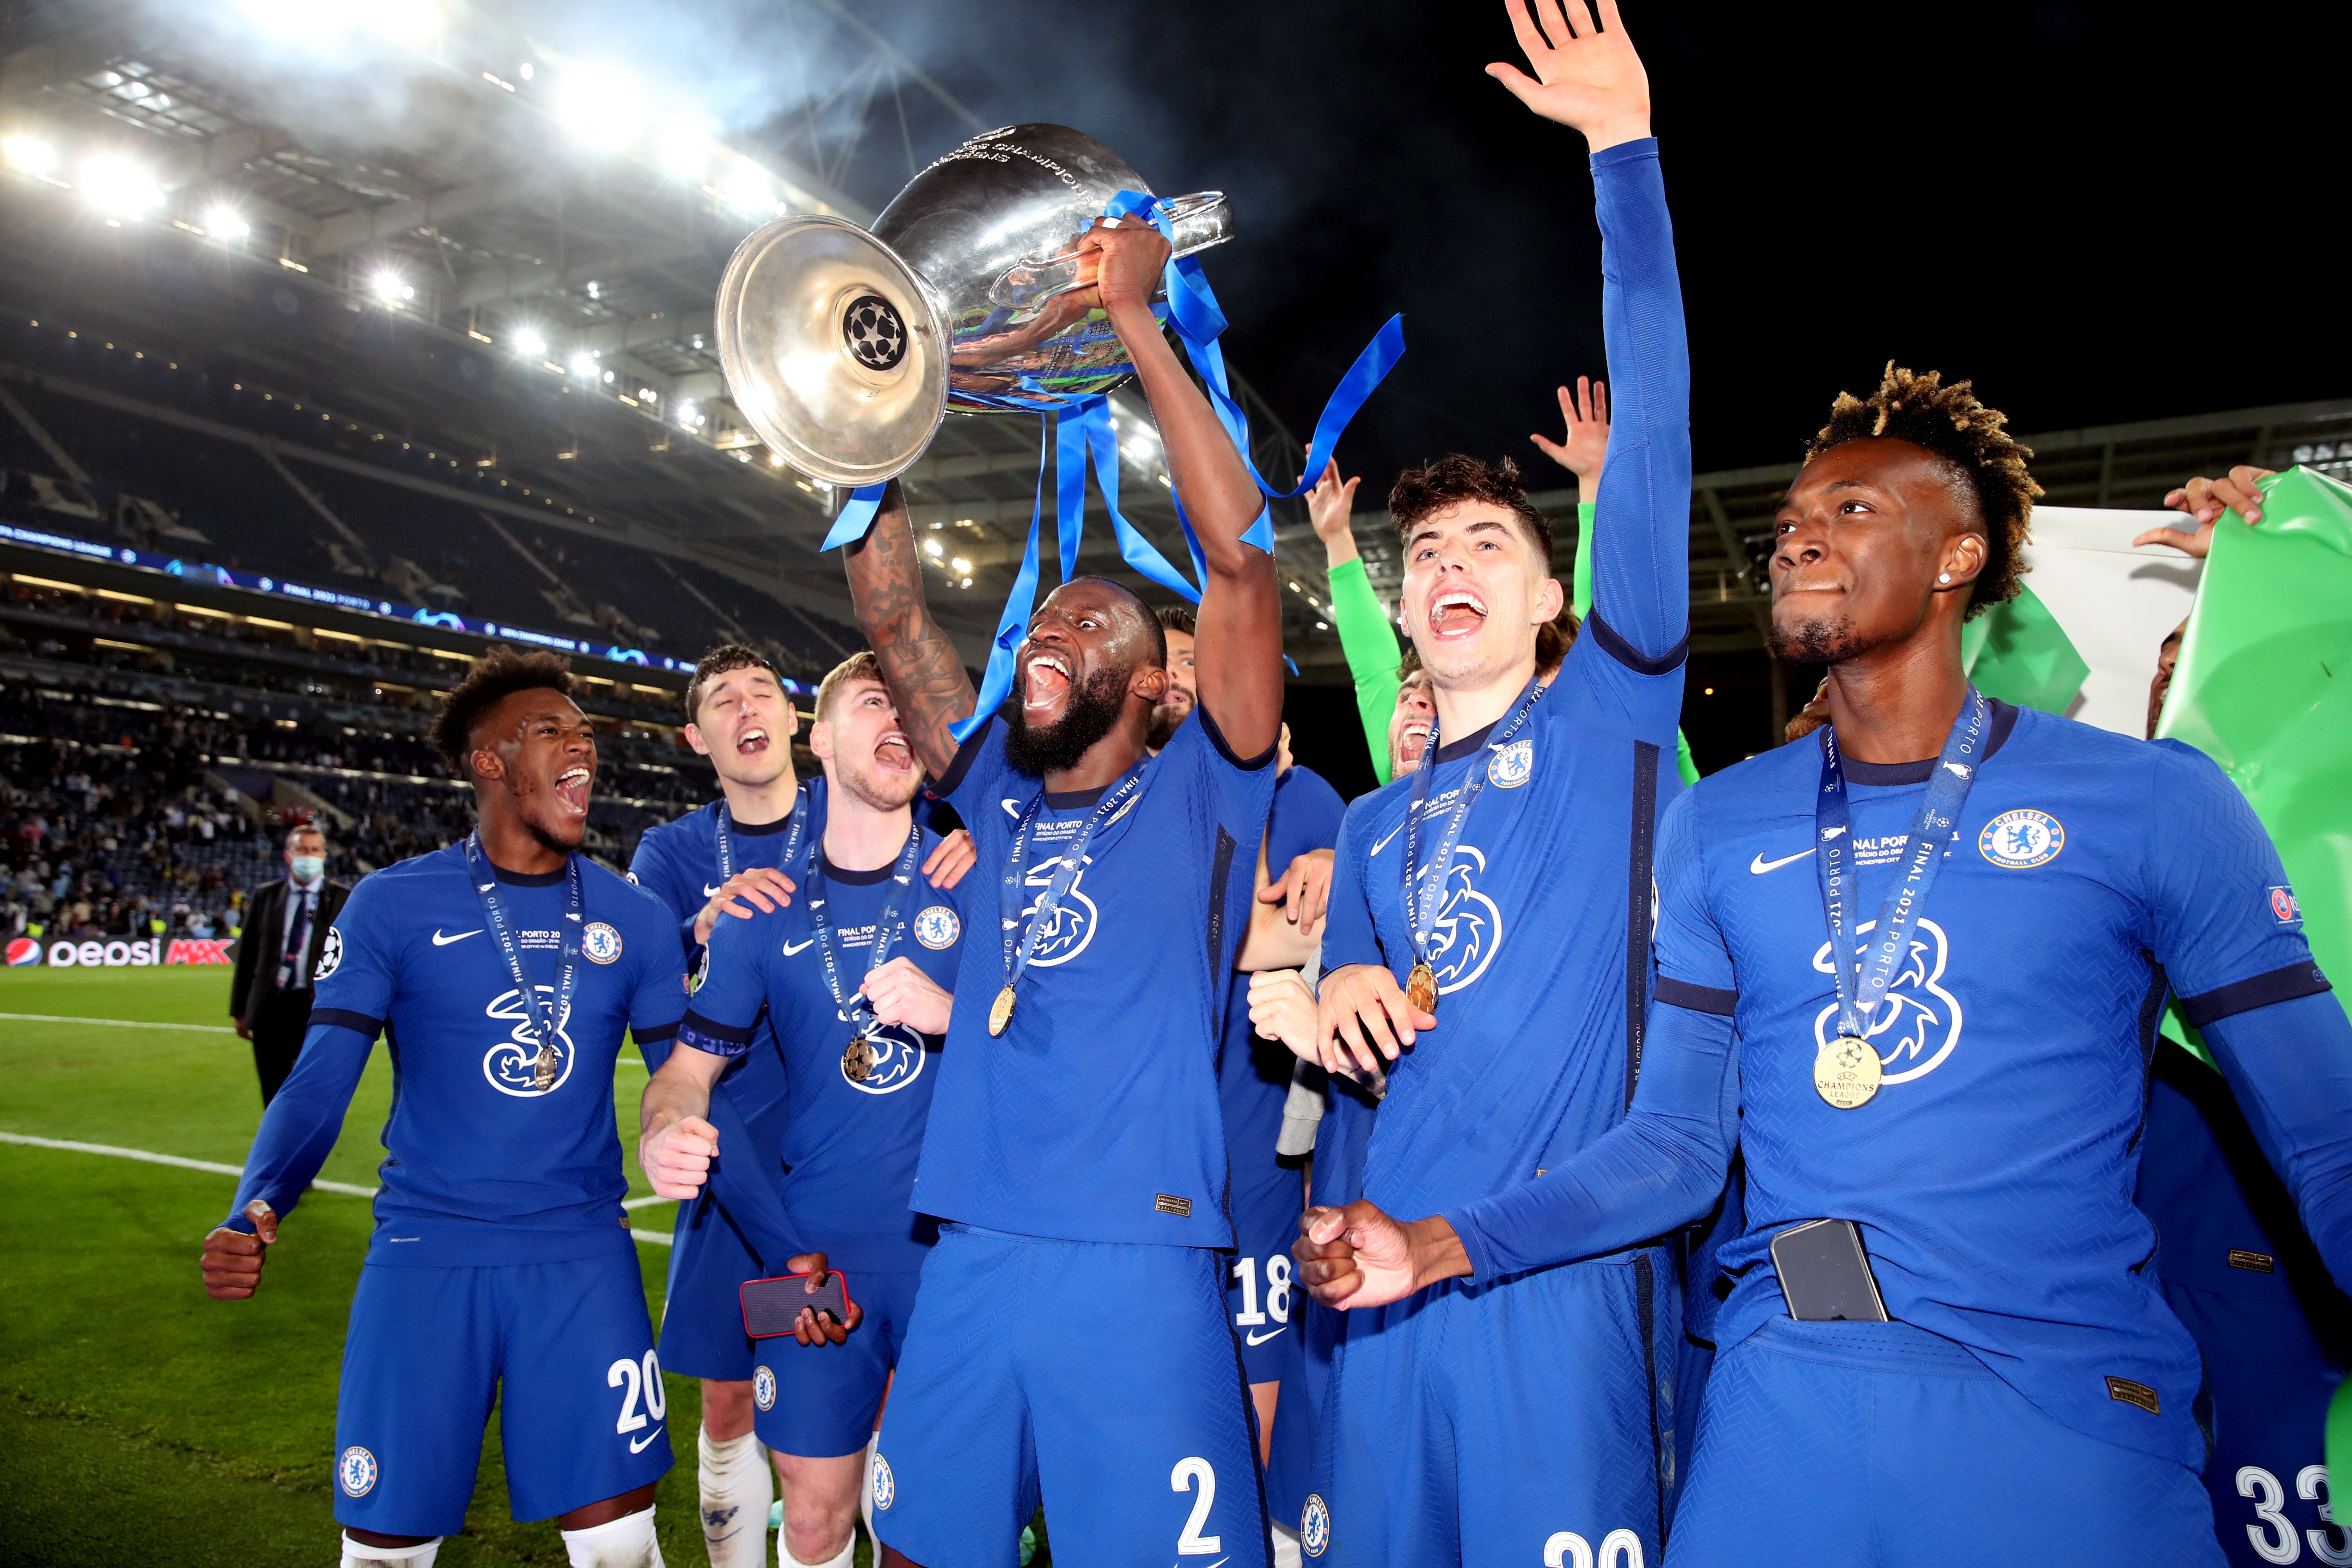 Chelsea beat Manchester City to win the Champions League in Porto